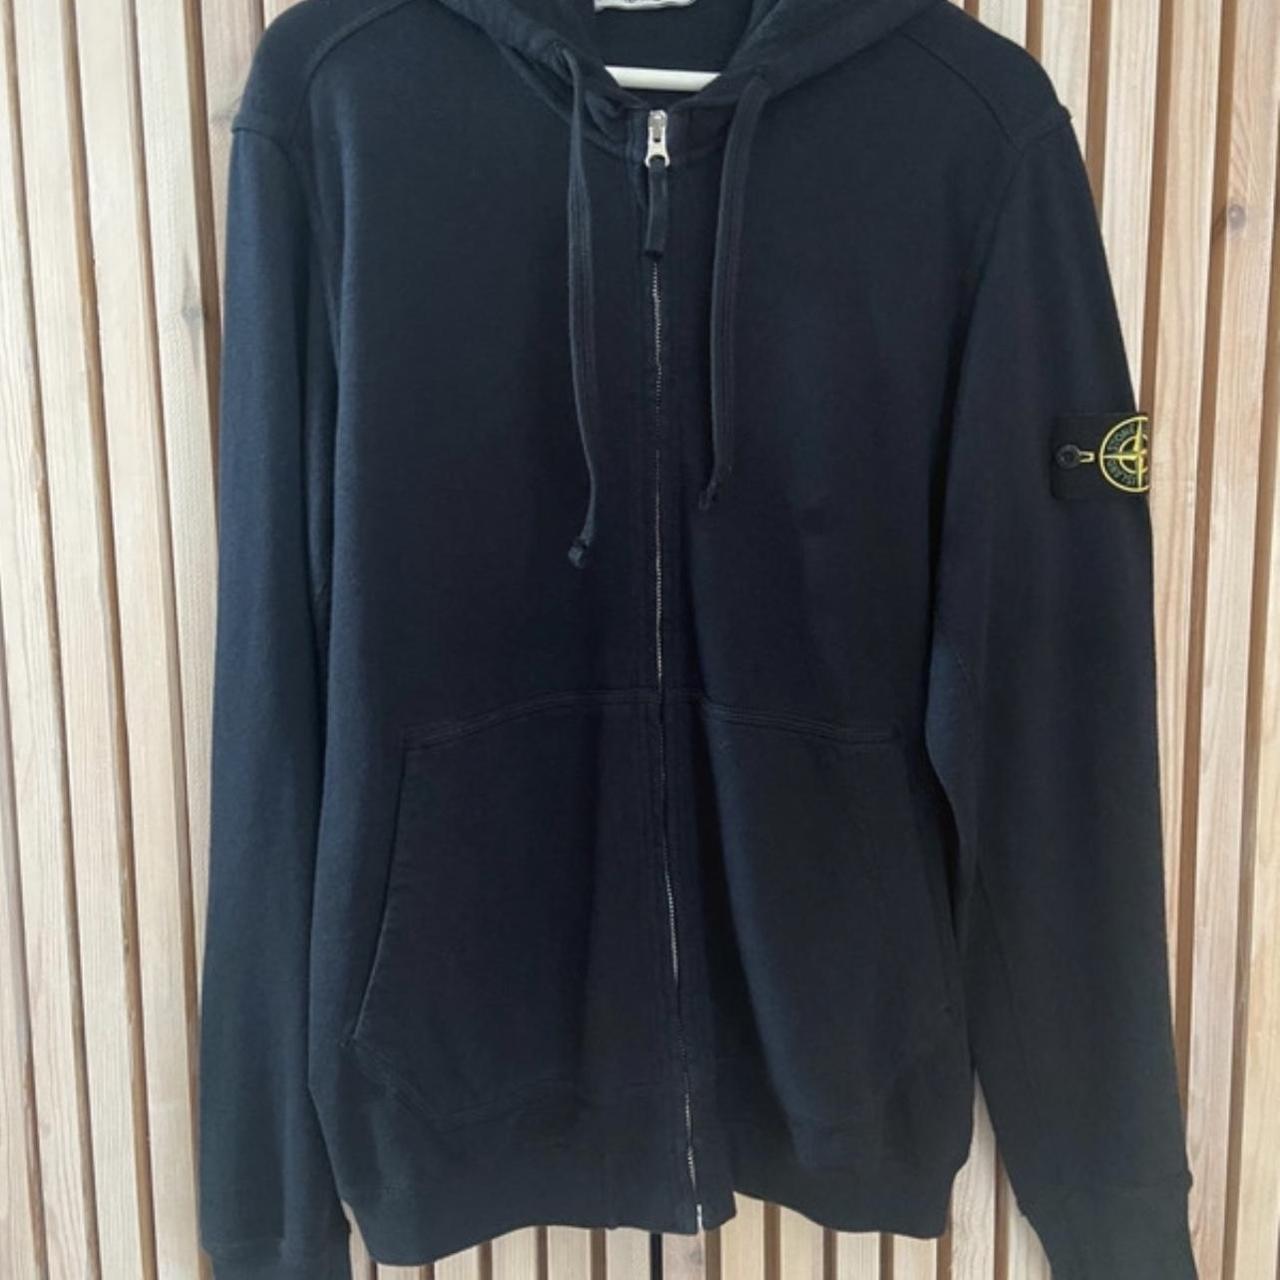 Black stone island zip up Authentic shown by... - Depop